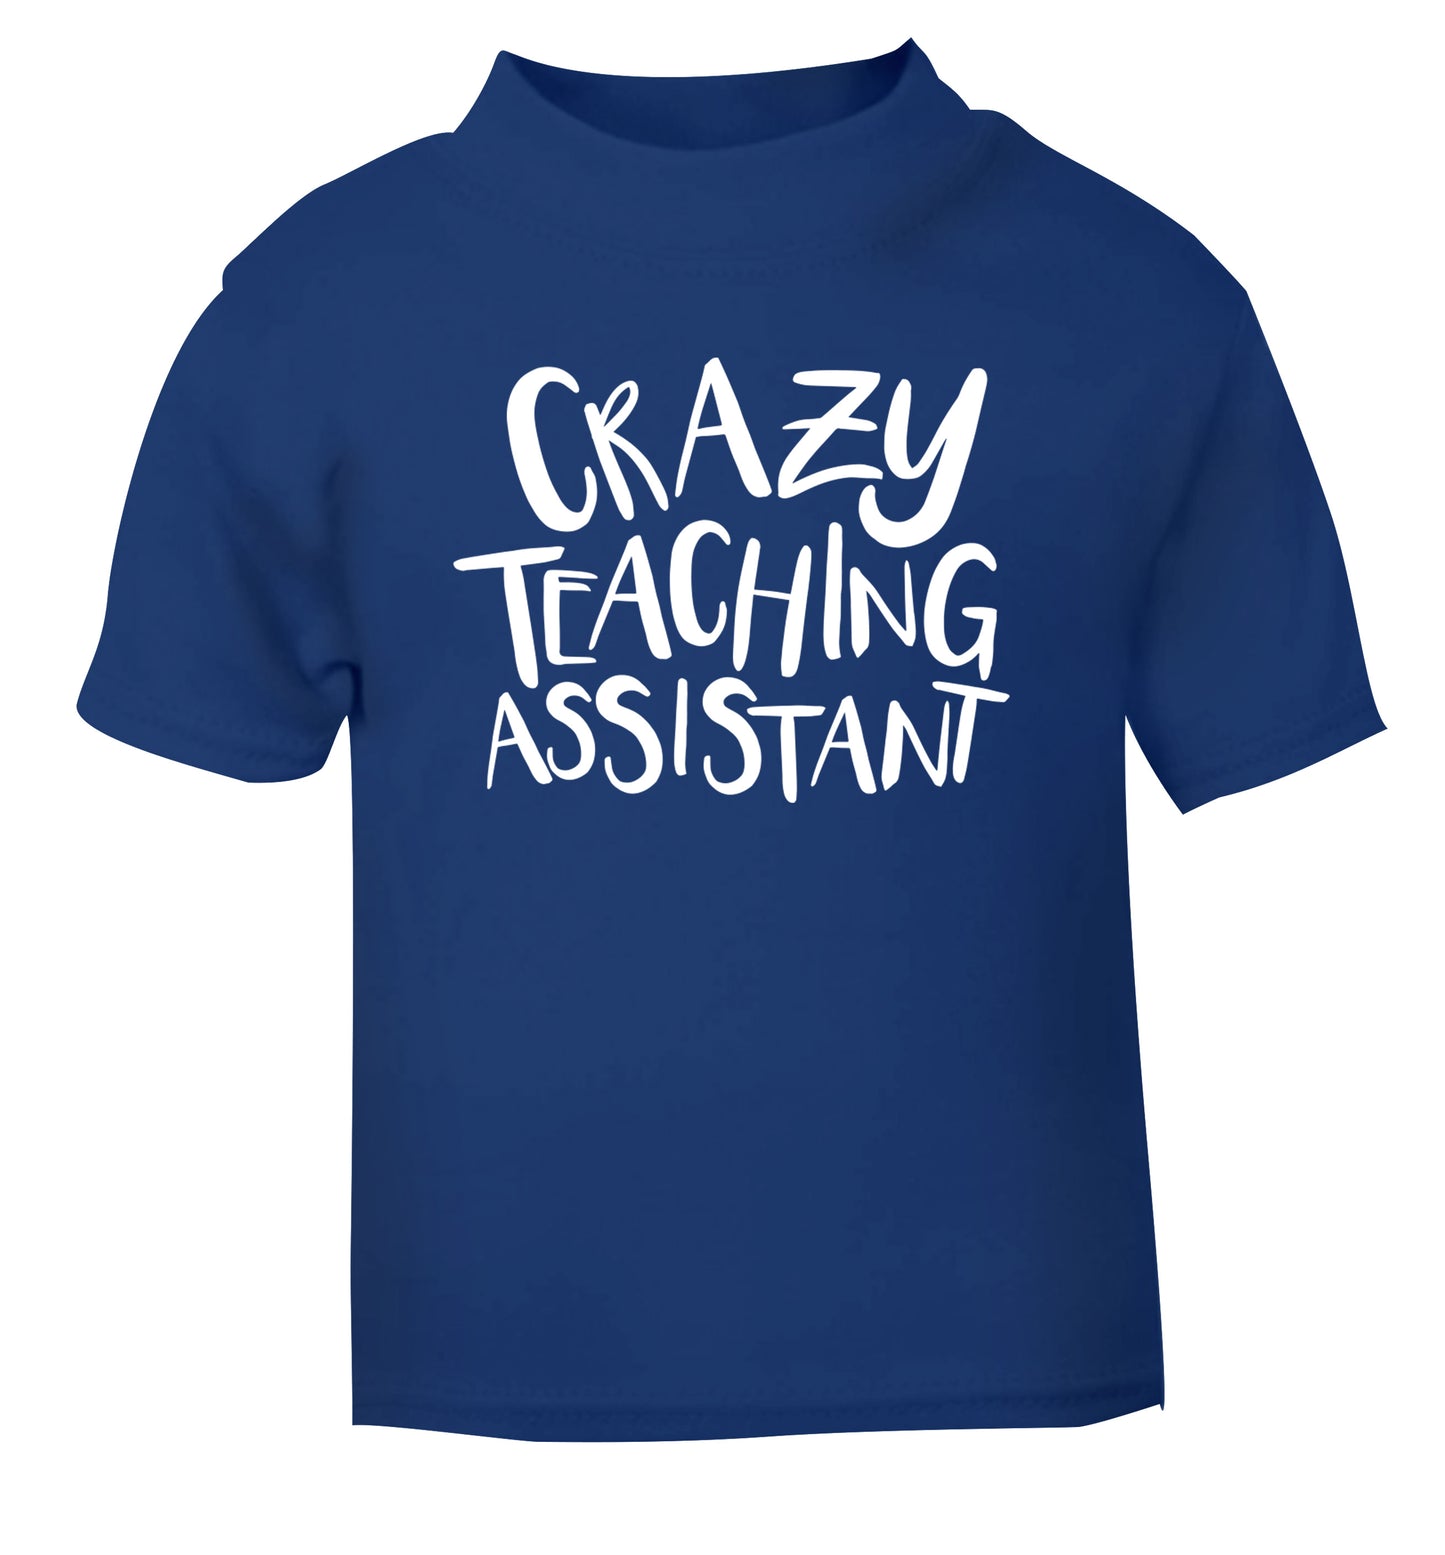 Crazy Teaching Assistant blue Baby Toddler Tshirt 2 Years